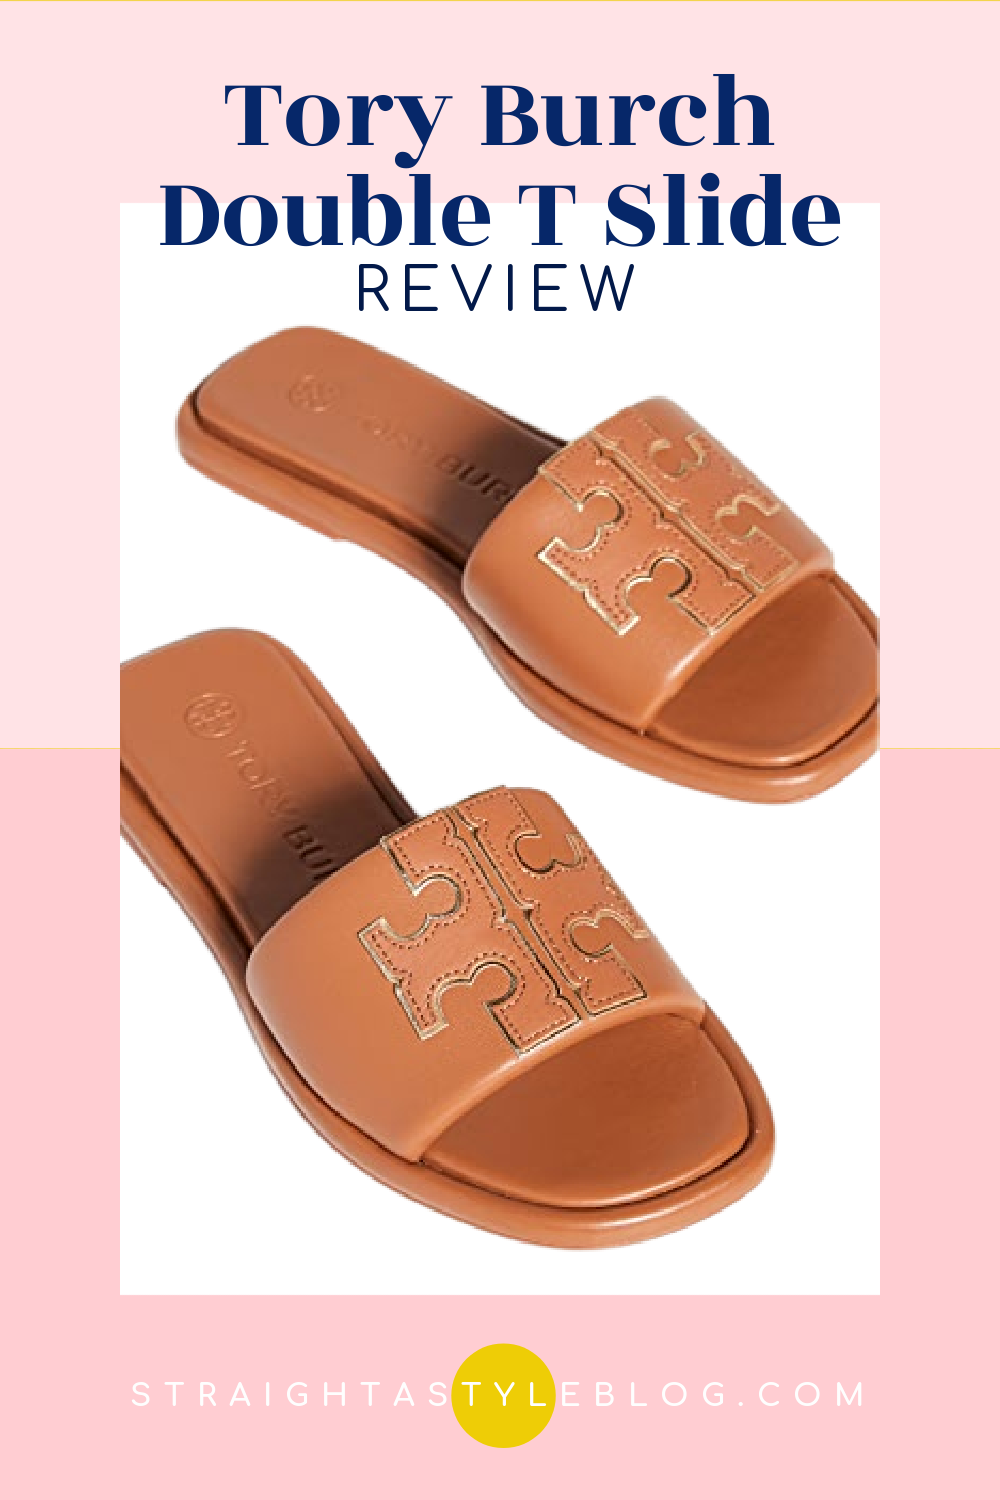 Tory Burch Double T Sport Slides Review - Straight A Style